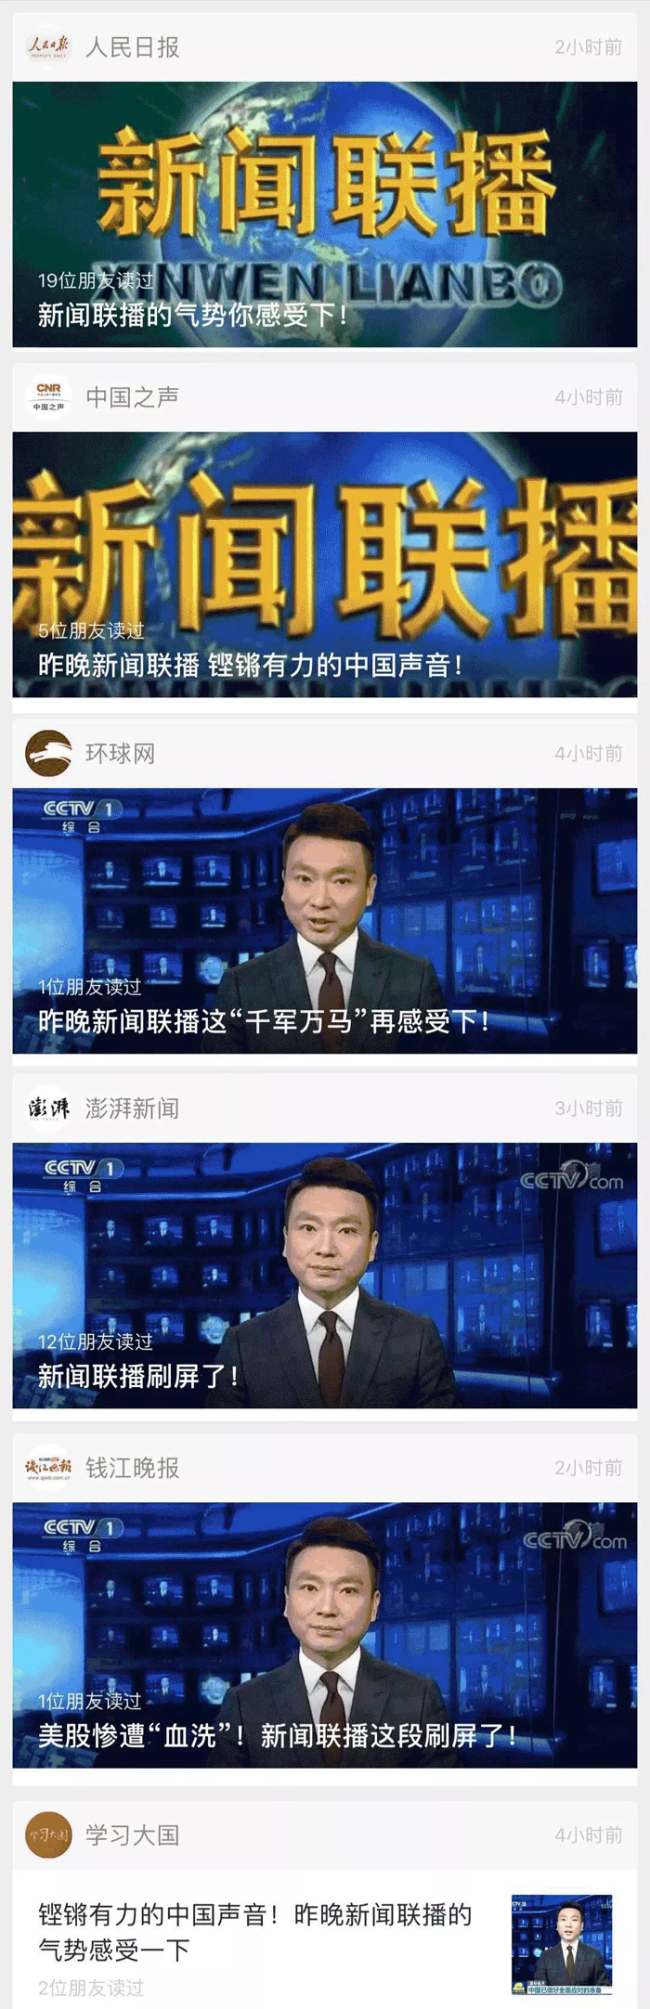 A screen shot showing that many Chinese media agencies have reprinted the CCTV editorial. [Photo: China Plus]